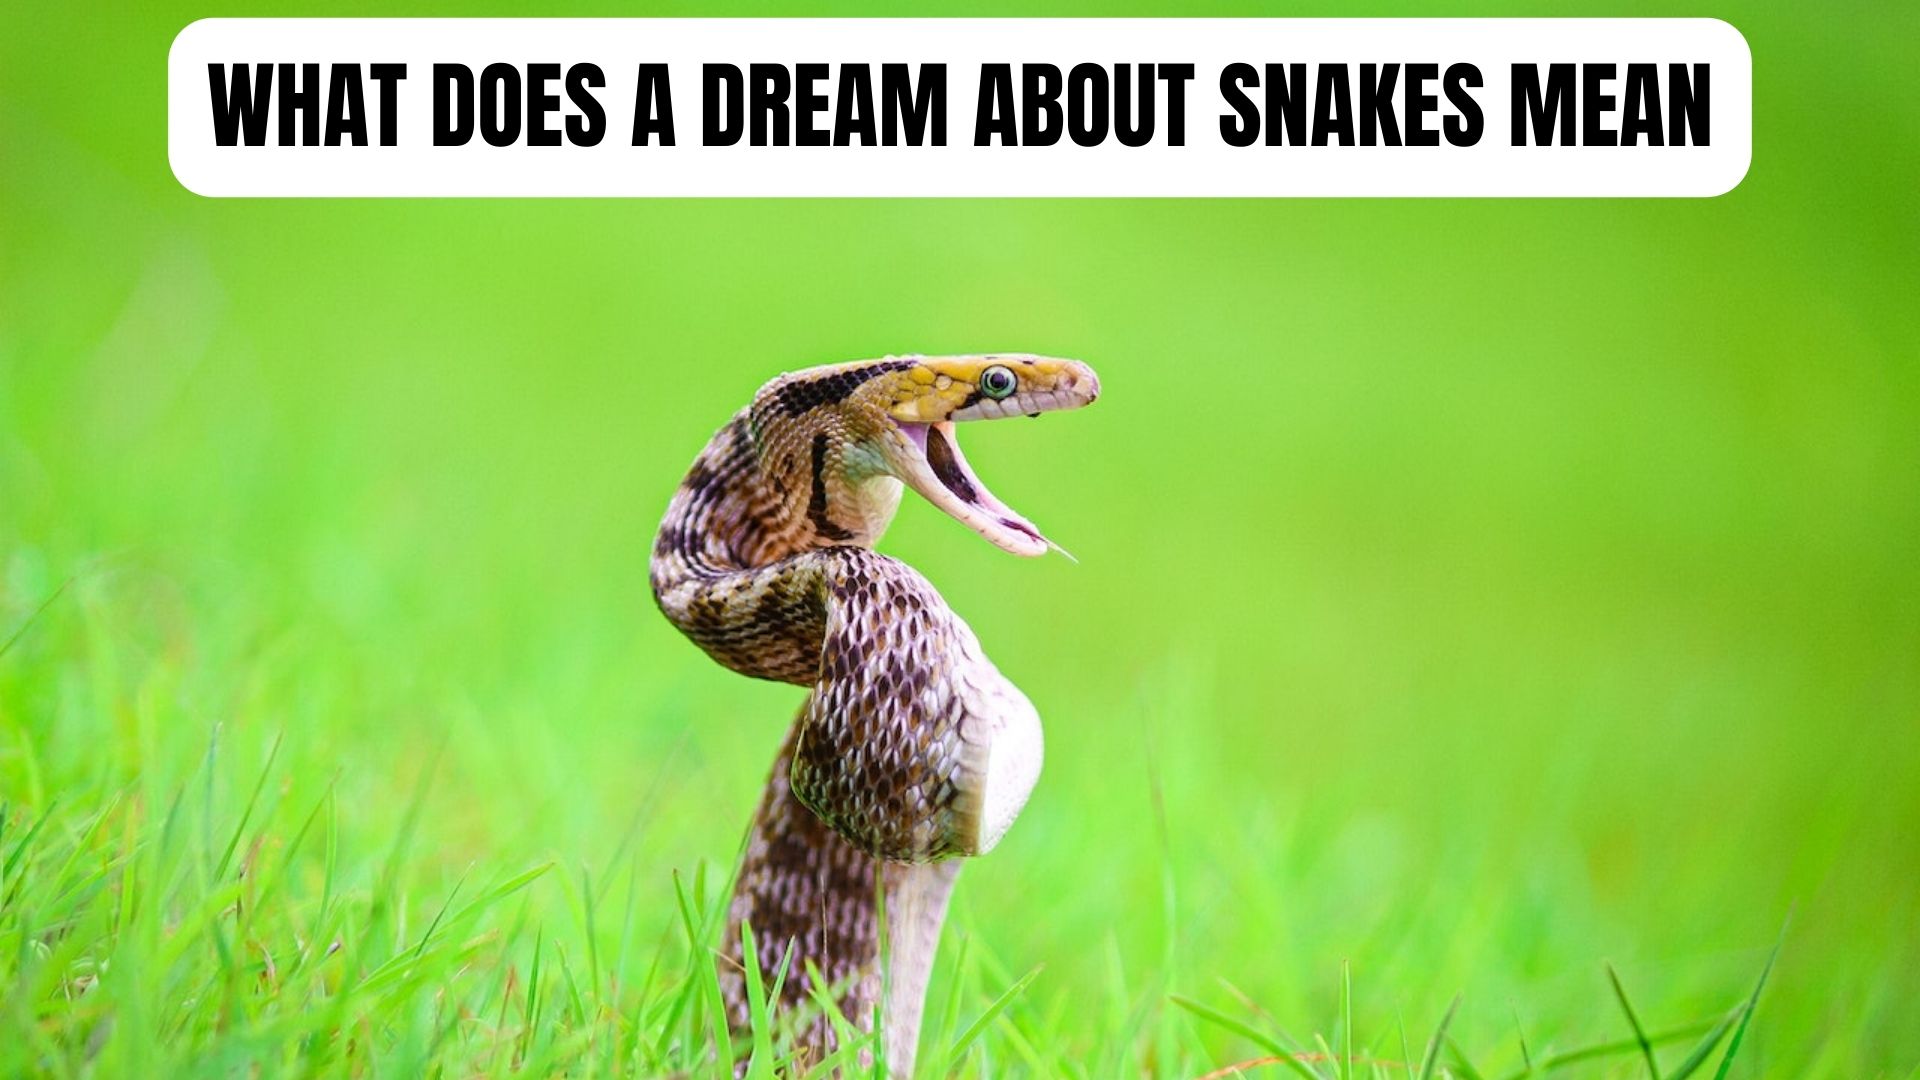 What Does A Dream About Snakes Mean?